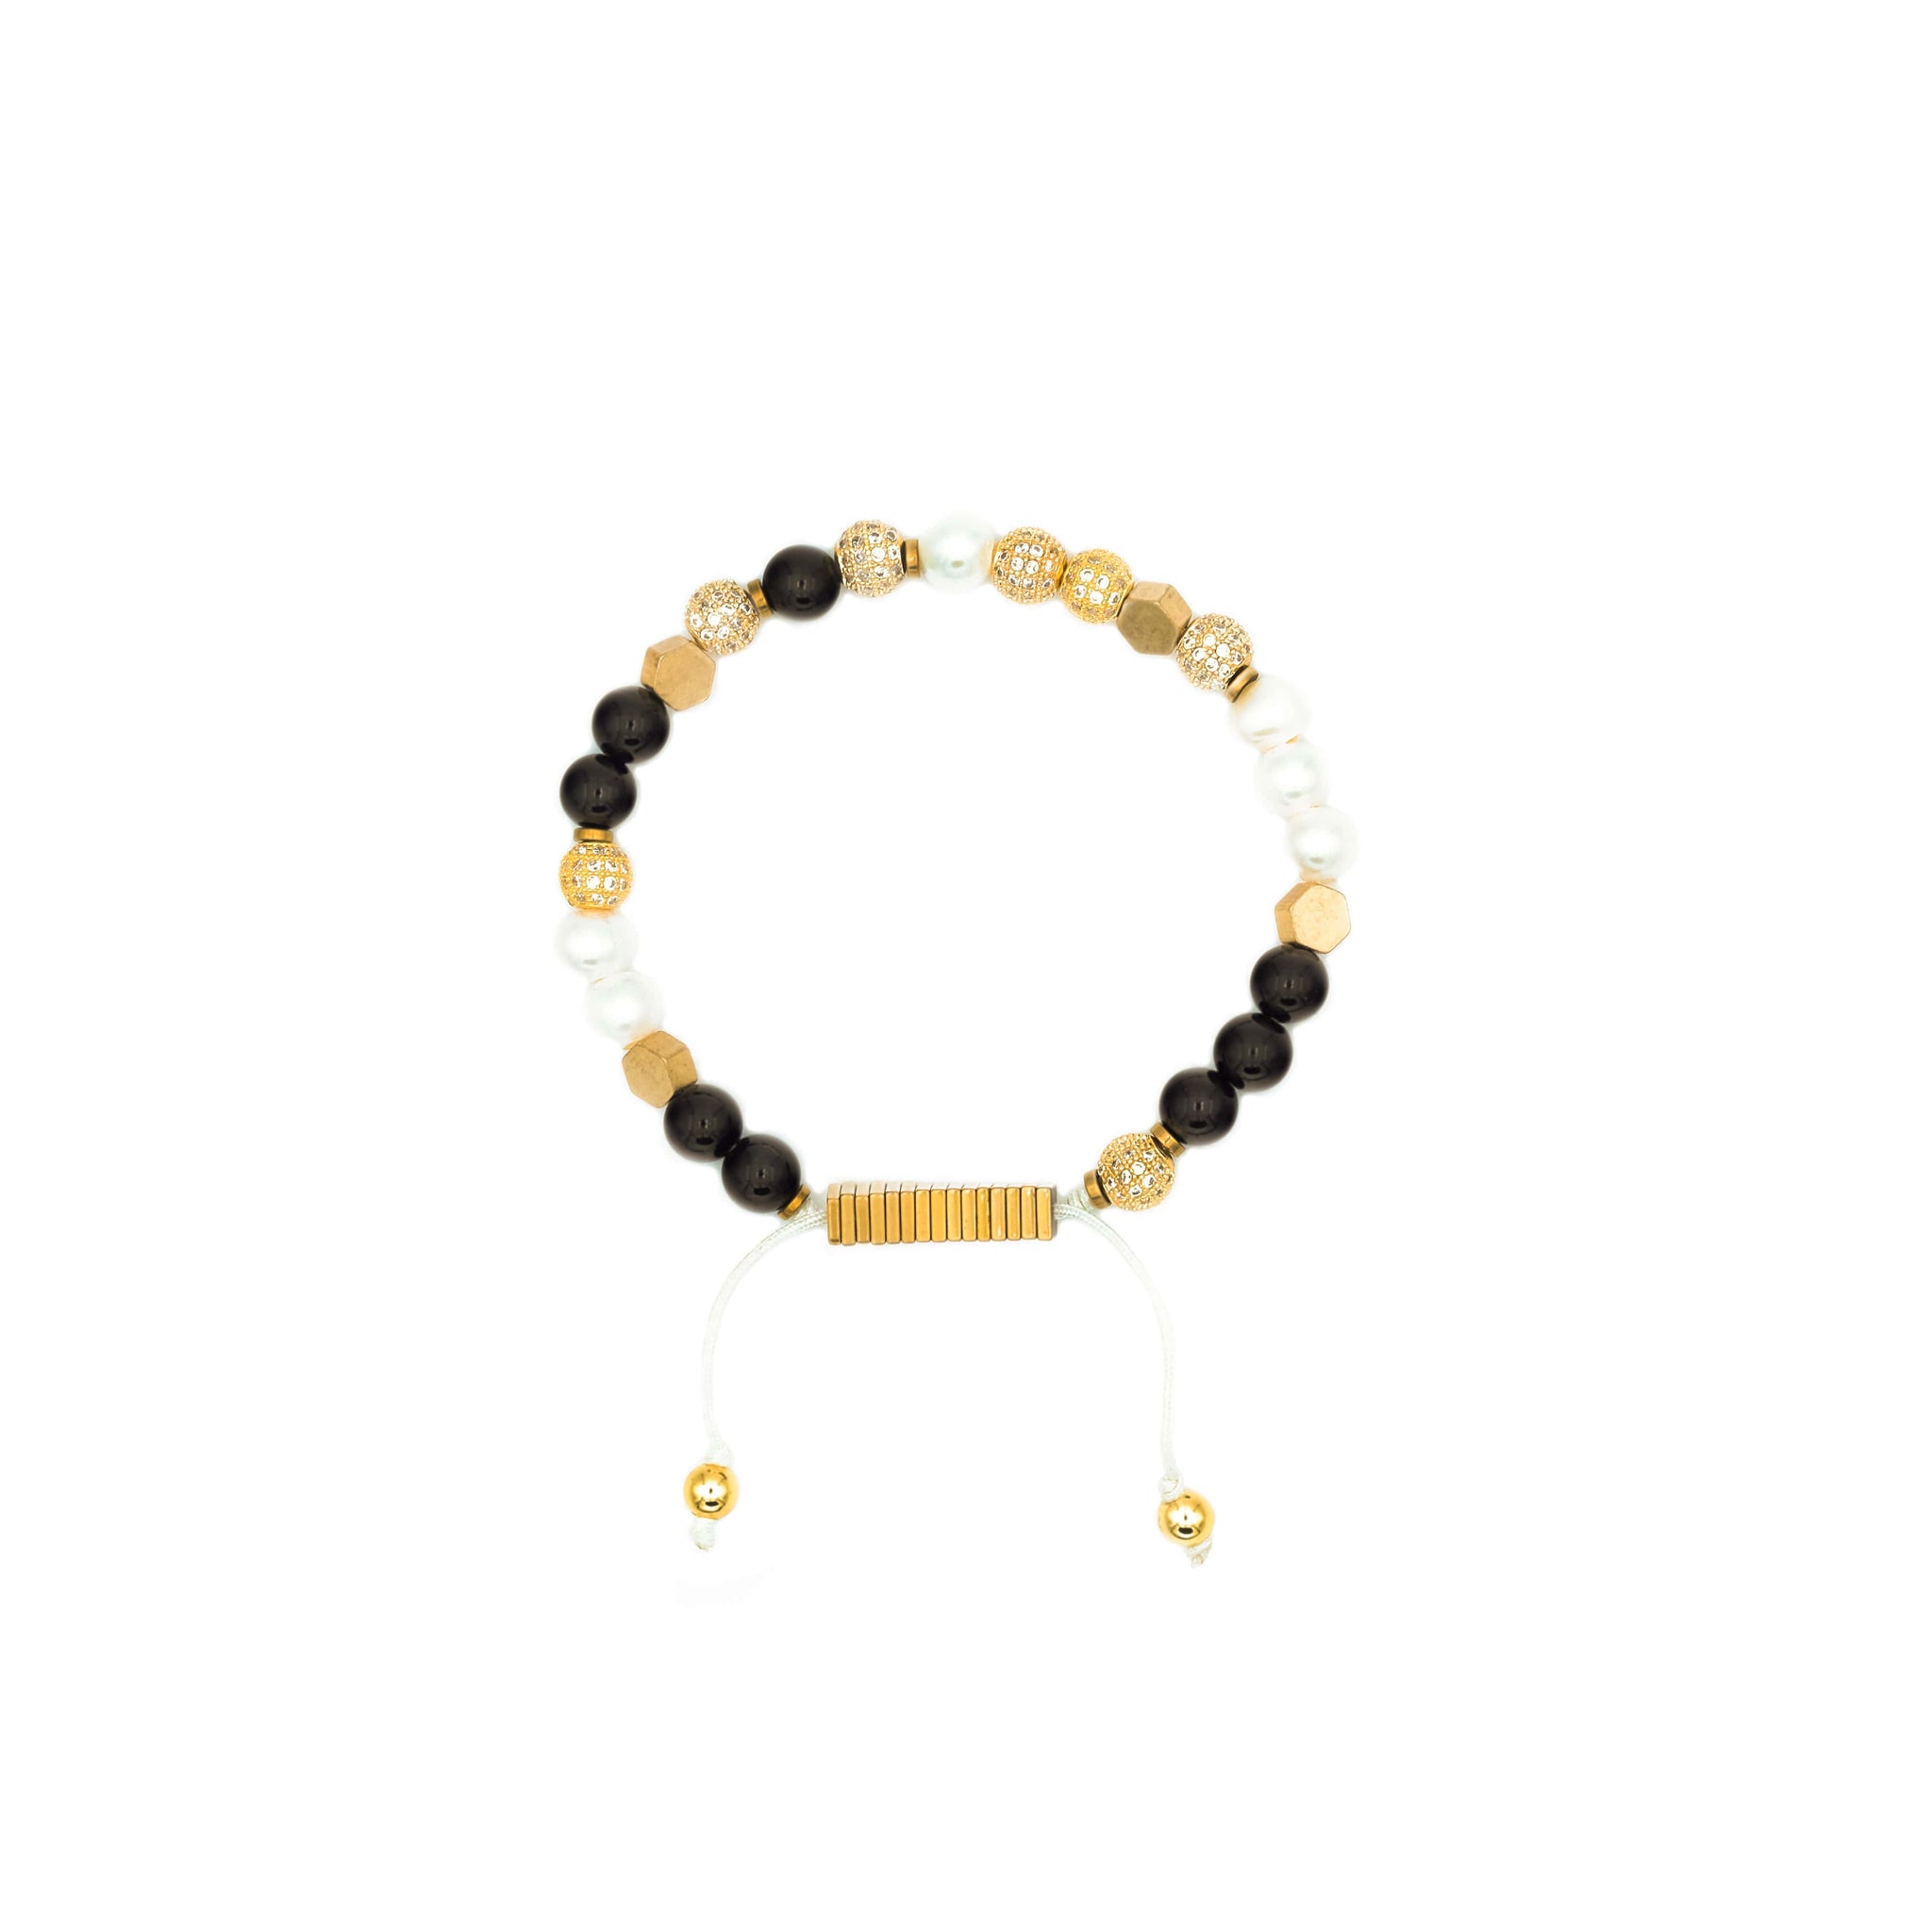 Handcrafted designer stone jewelry pearl black onyx bracelet with a cause charity - popvibe